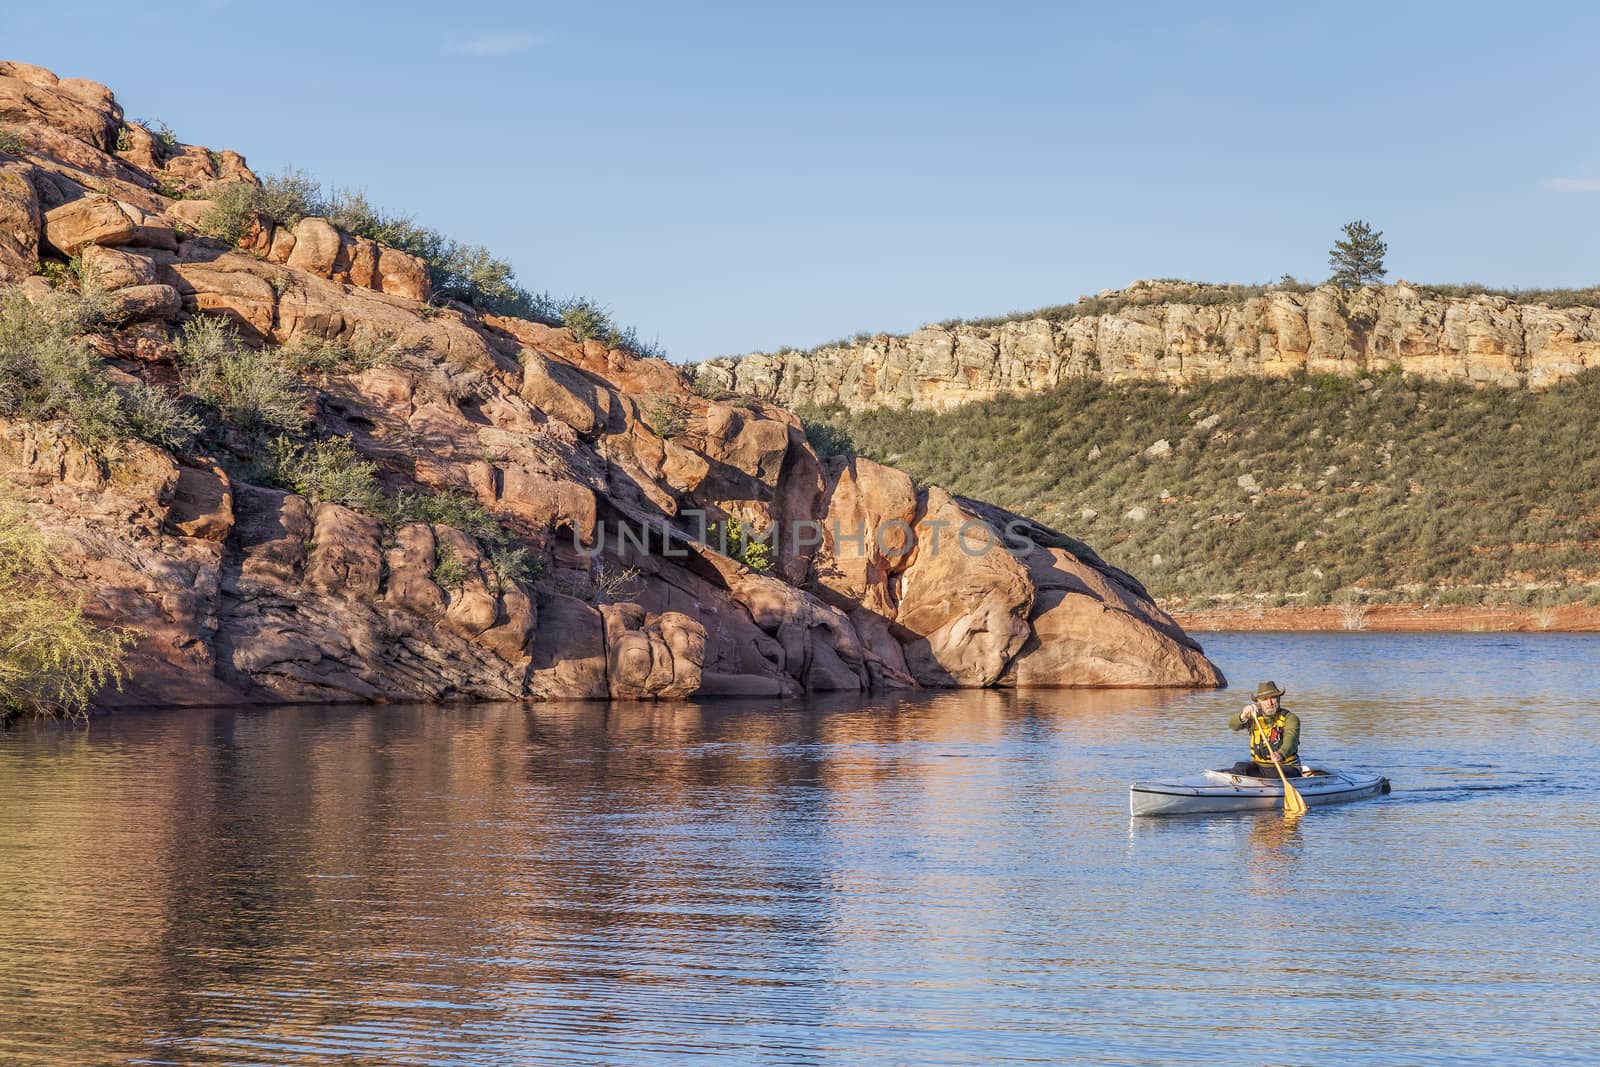 senior male paddling a decked expedition canoe on Horsetooth Reservoir near Fort Collins, Colorado